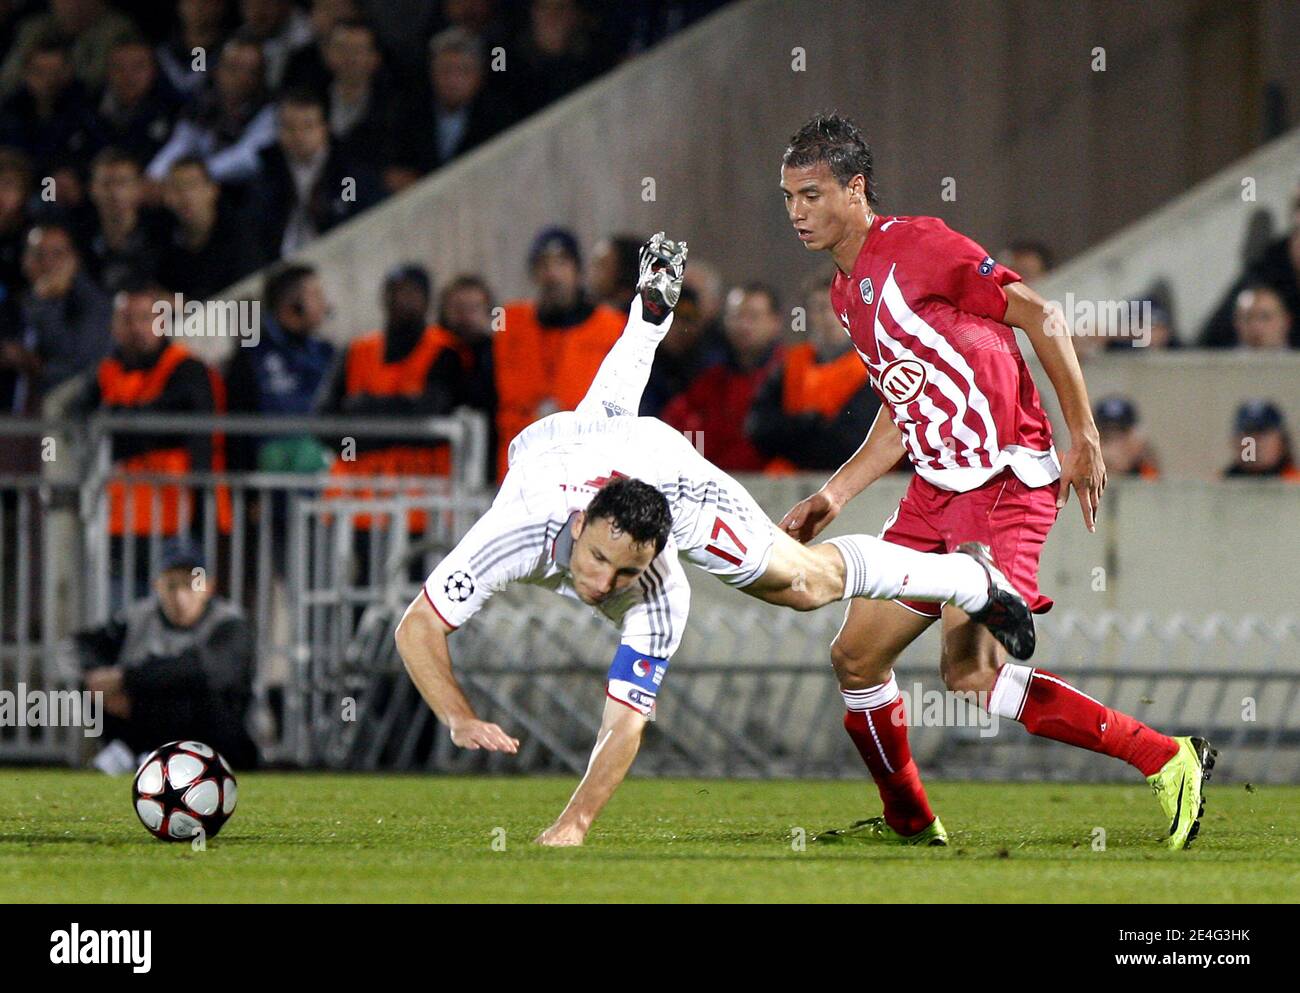 Bordeaux's Marouane Chamakh tackles Bayern Munich's Mark Van Bommel during  the UEFA Champions League Soccer Match, Group A , Girondins de Bordeaux vs  FC Bayern Munich at the Stade Chaban-Delmas in Bordeaux,